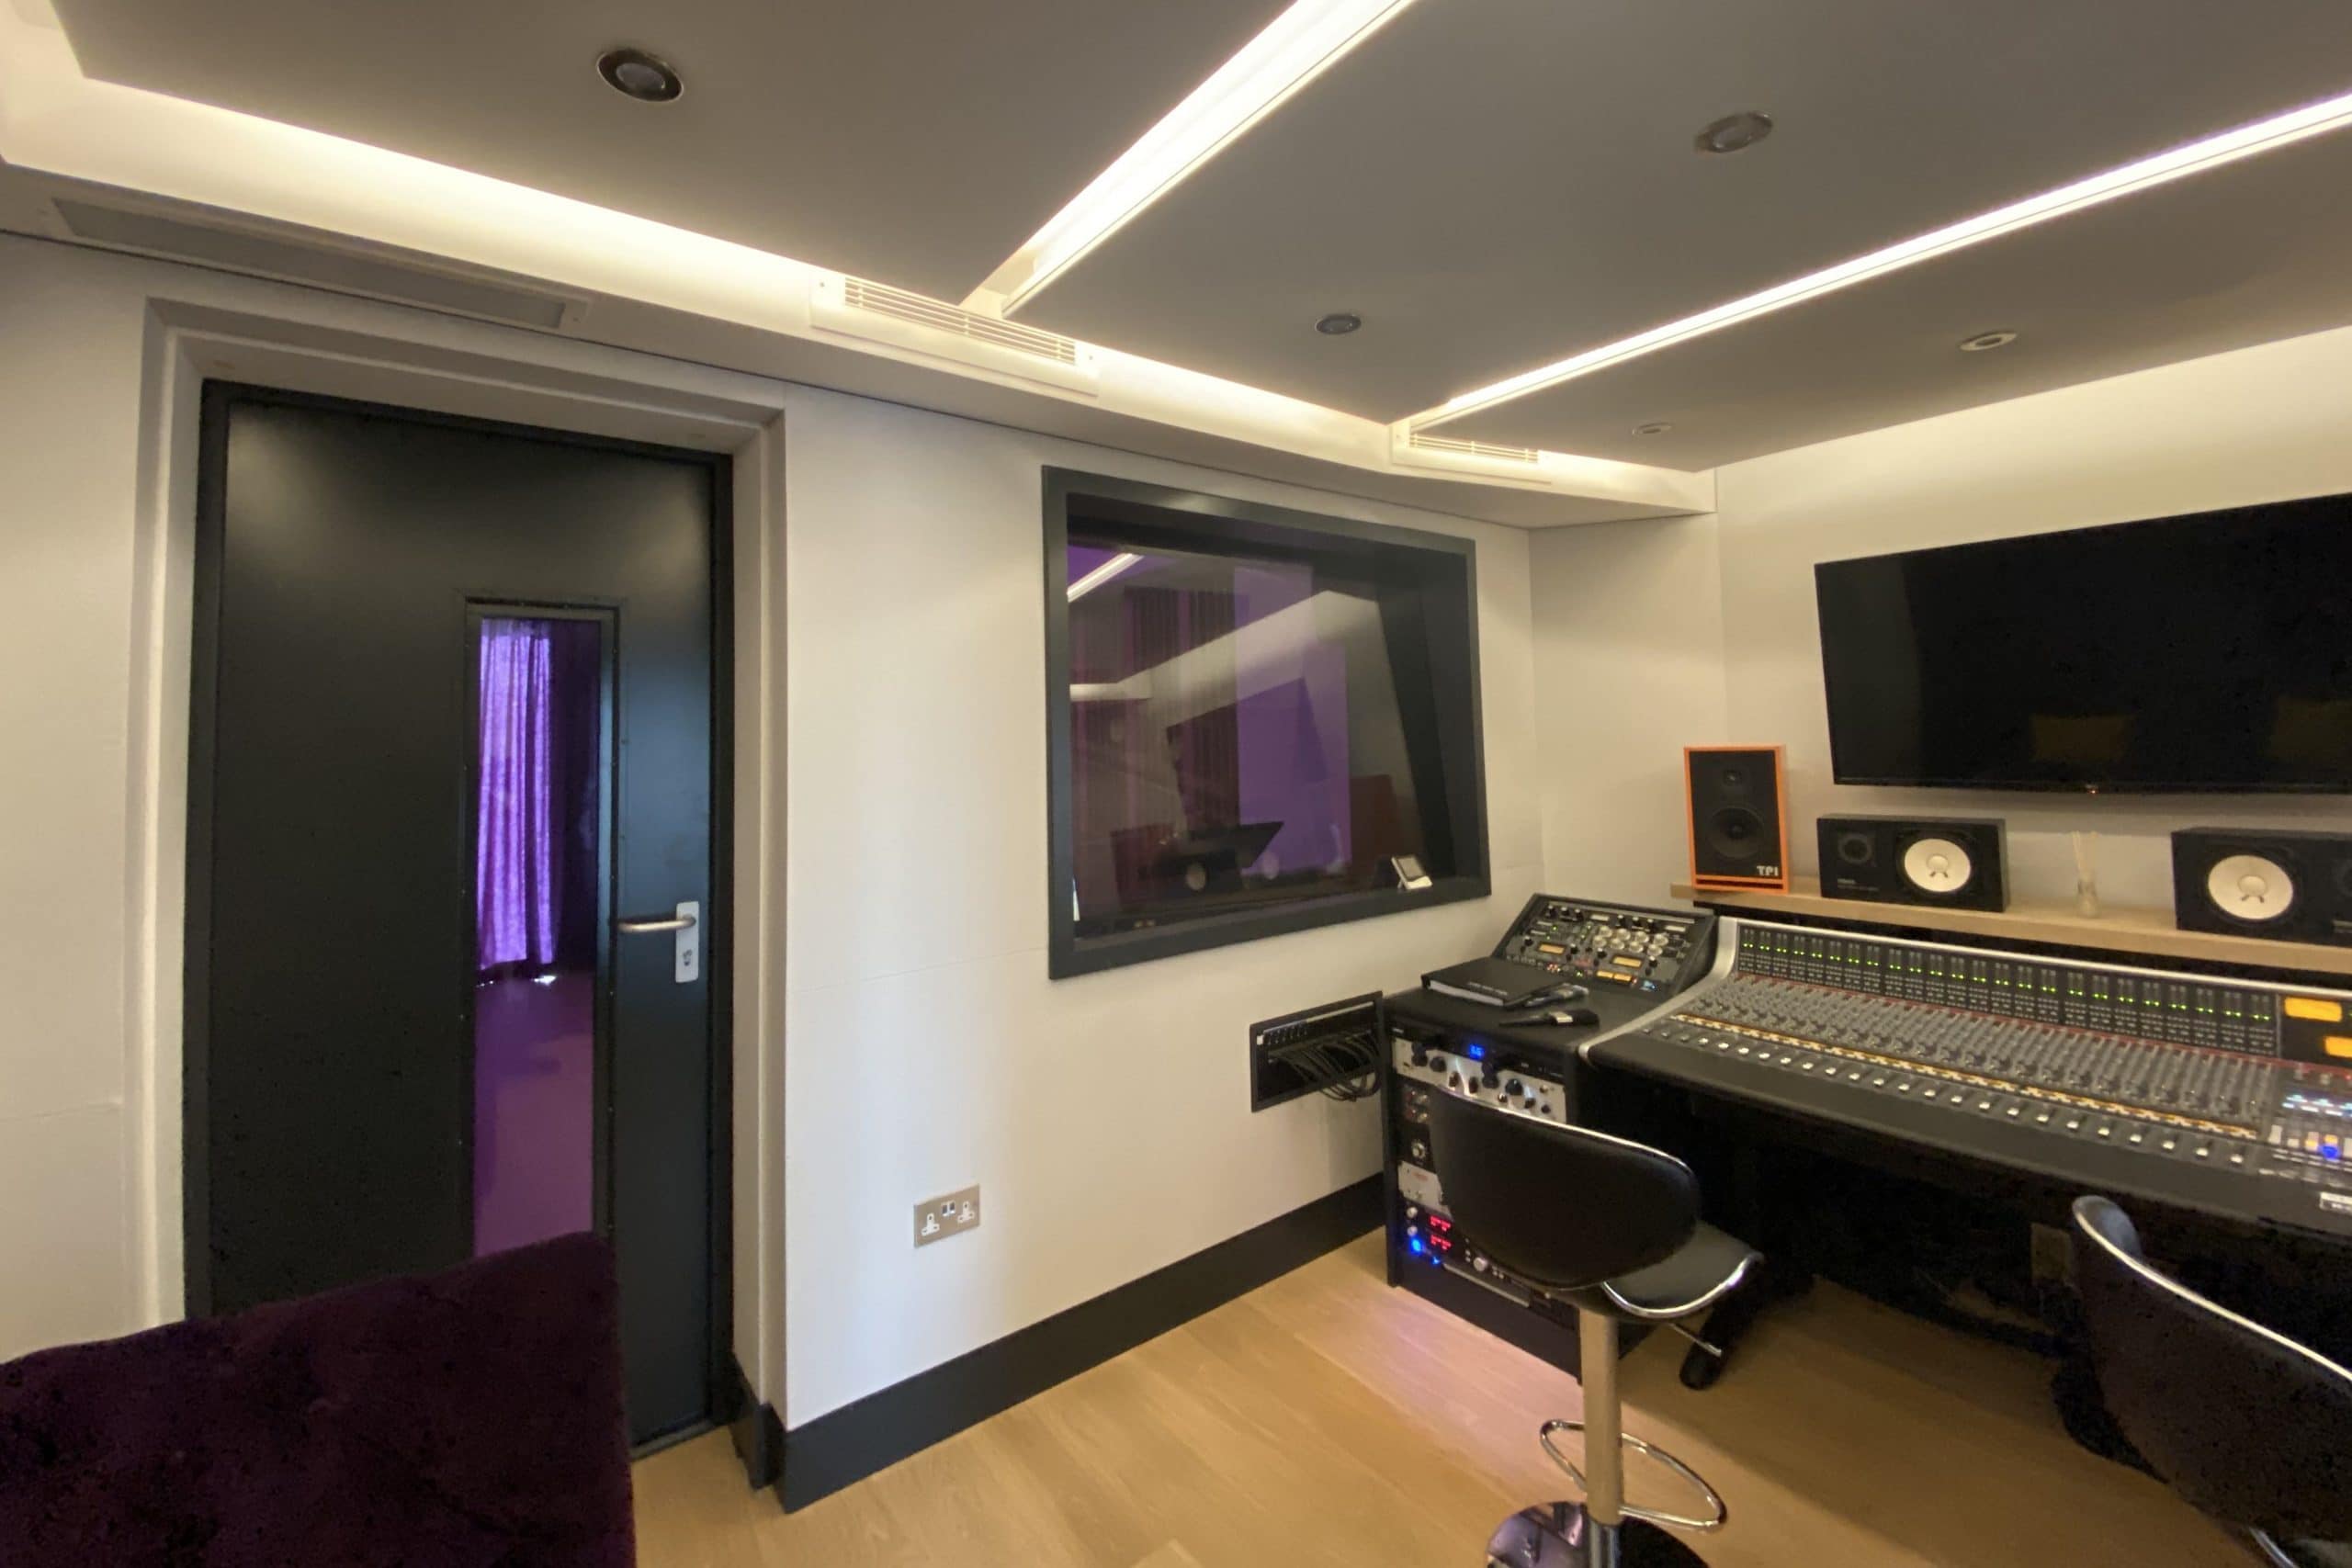 View of multiple white vents of ducted air conditioning system in Arden barn conversion in Lingfield in a music studio over control desk fitted by SubCoolFM